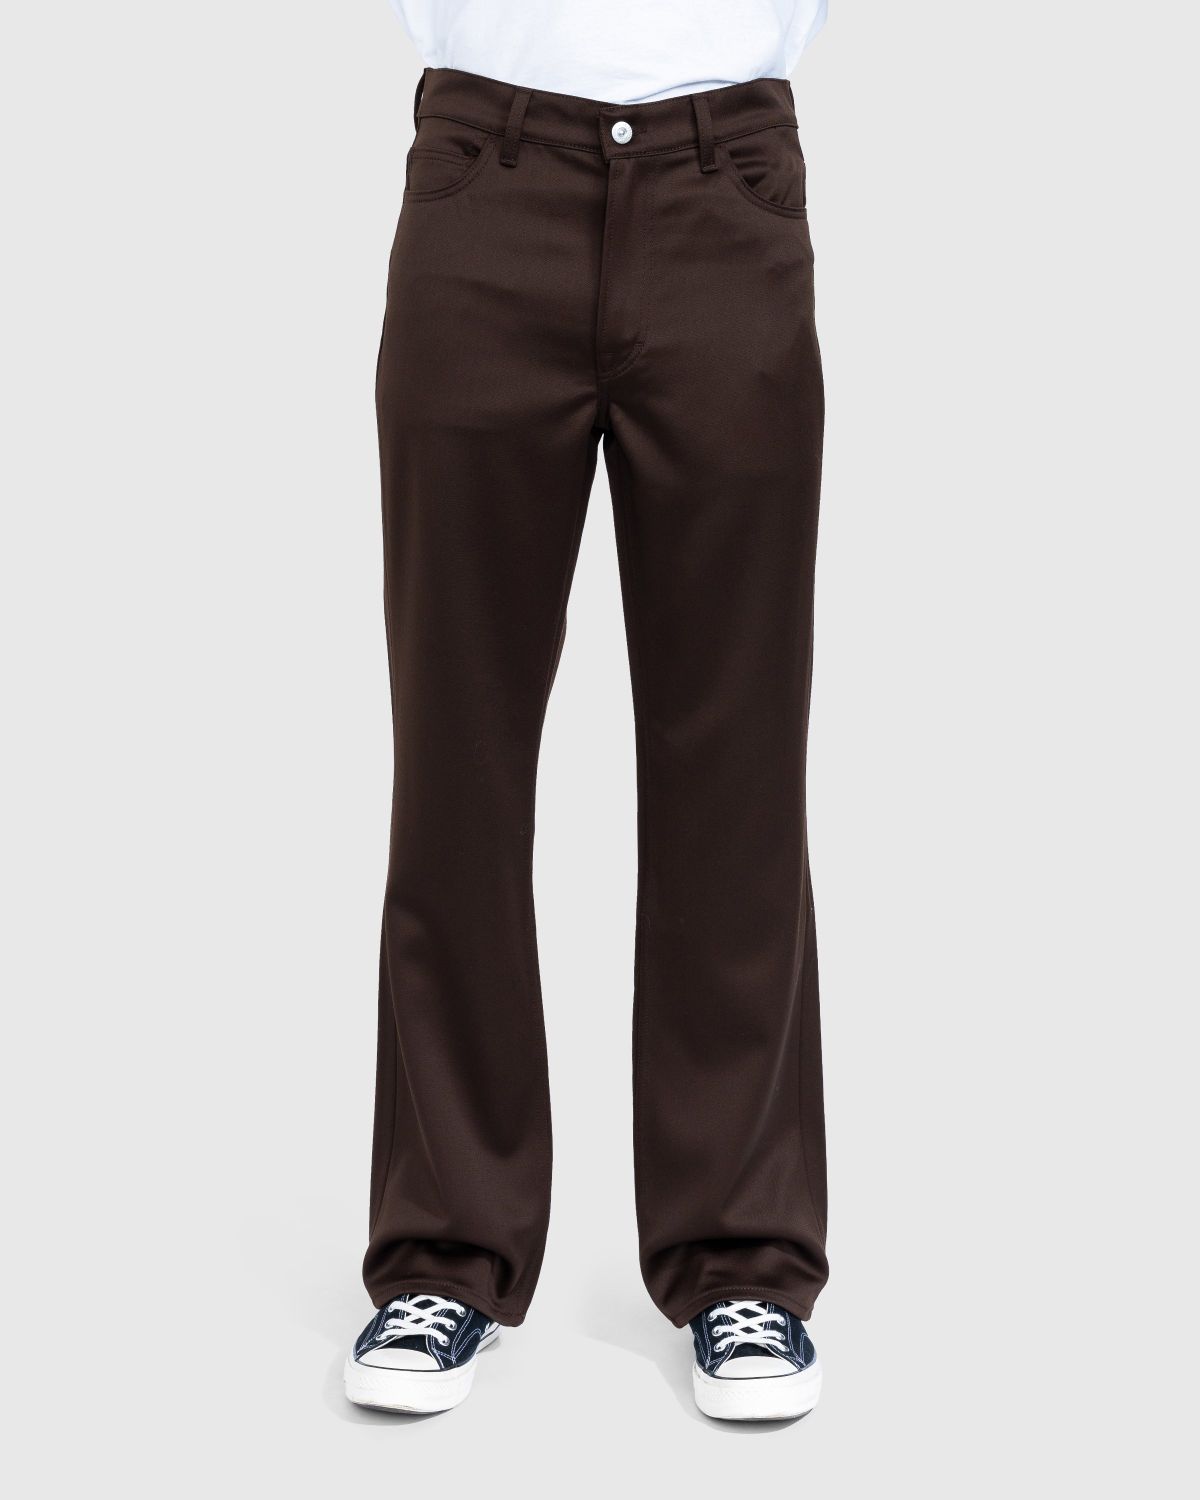 Our Legacy – ‘70s Cut Wool Trouser Brown - Trousers - Brown - Image 2